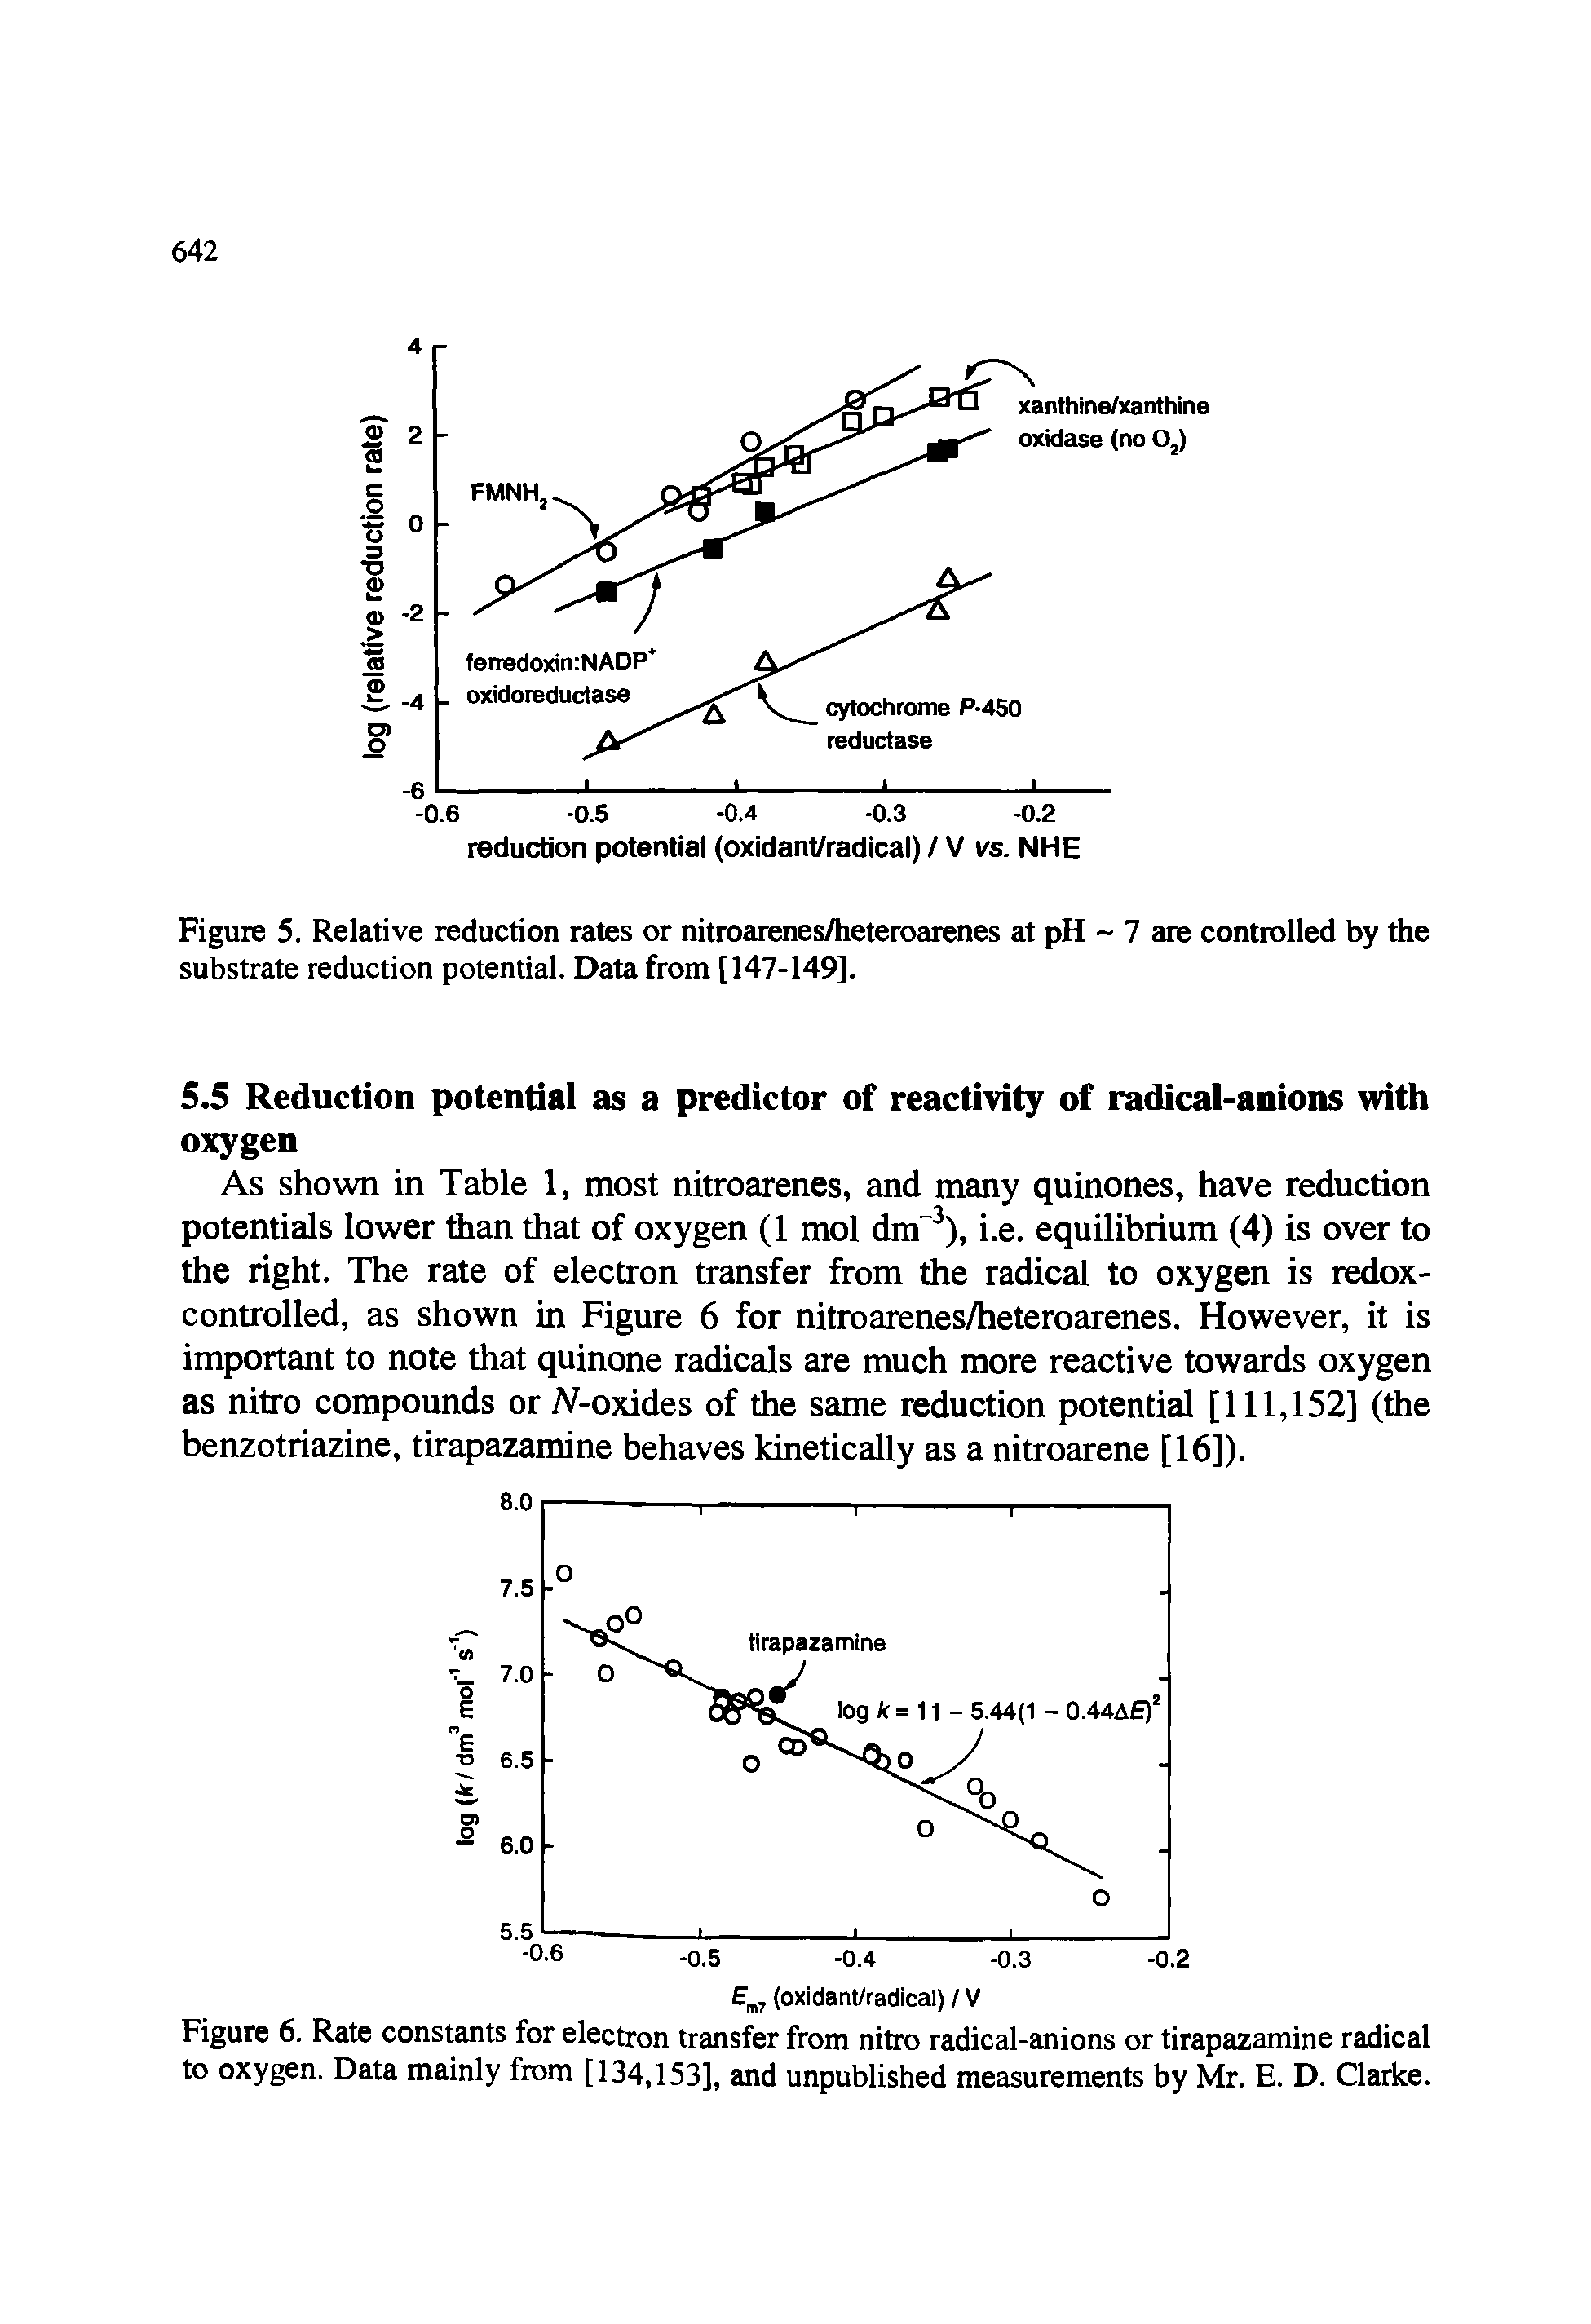 Figure 6. Rate constants for electron transfer from nitro radical-anions or tirapazamine radical to oxygen. Data mainly from [134,153], and unpublished measurements by Mr. E. D. Clarke.